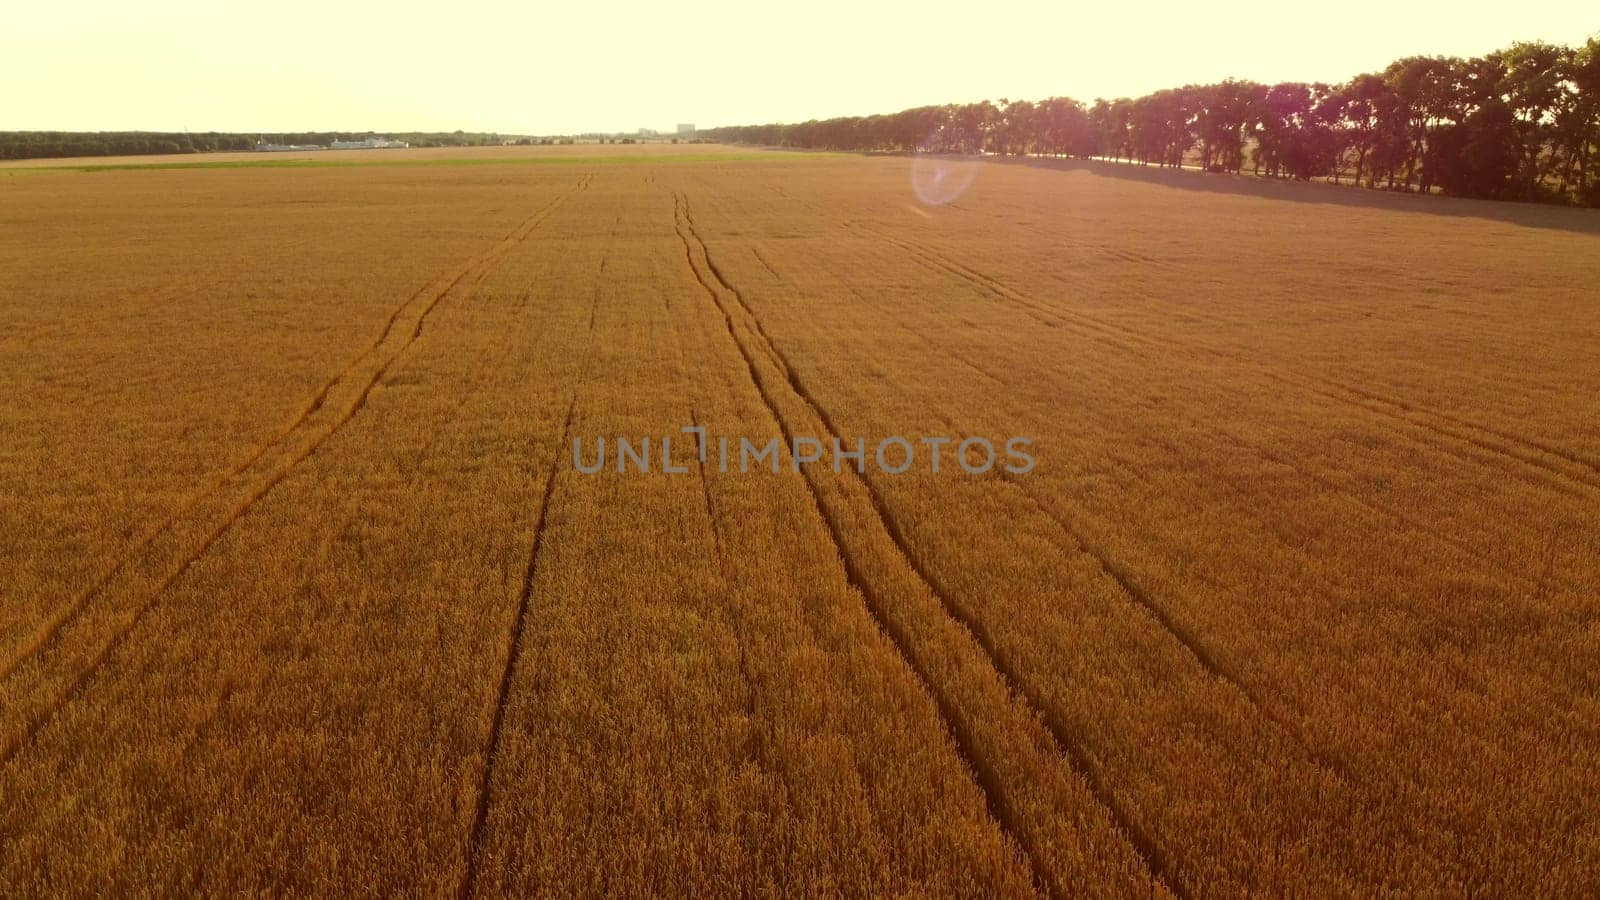 Flying over field of yellow ripe wheat during dawn sunset. Sun glare. Natural background. Rural countryside scenery. Agricultural landscape. Aerial drone view flight over ears of wheat grains